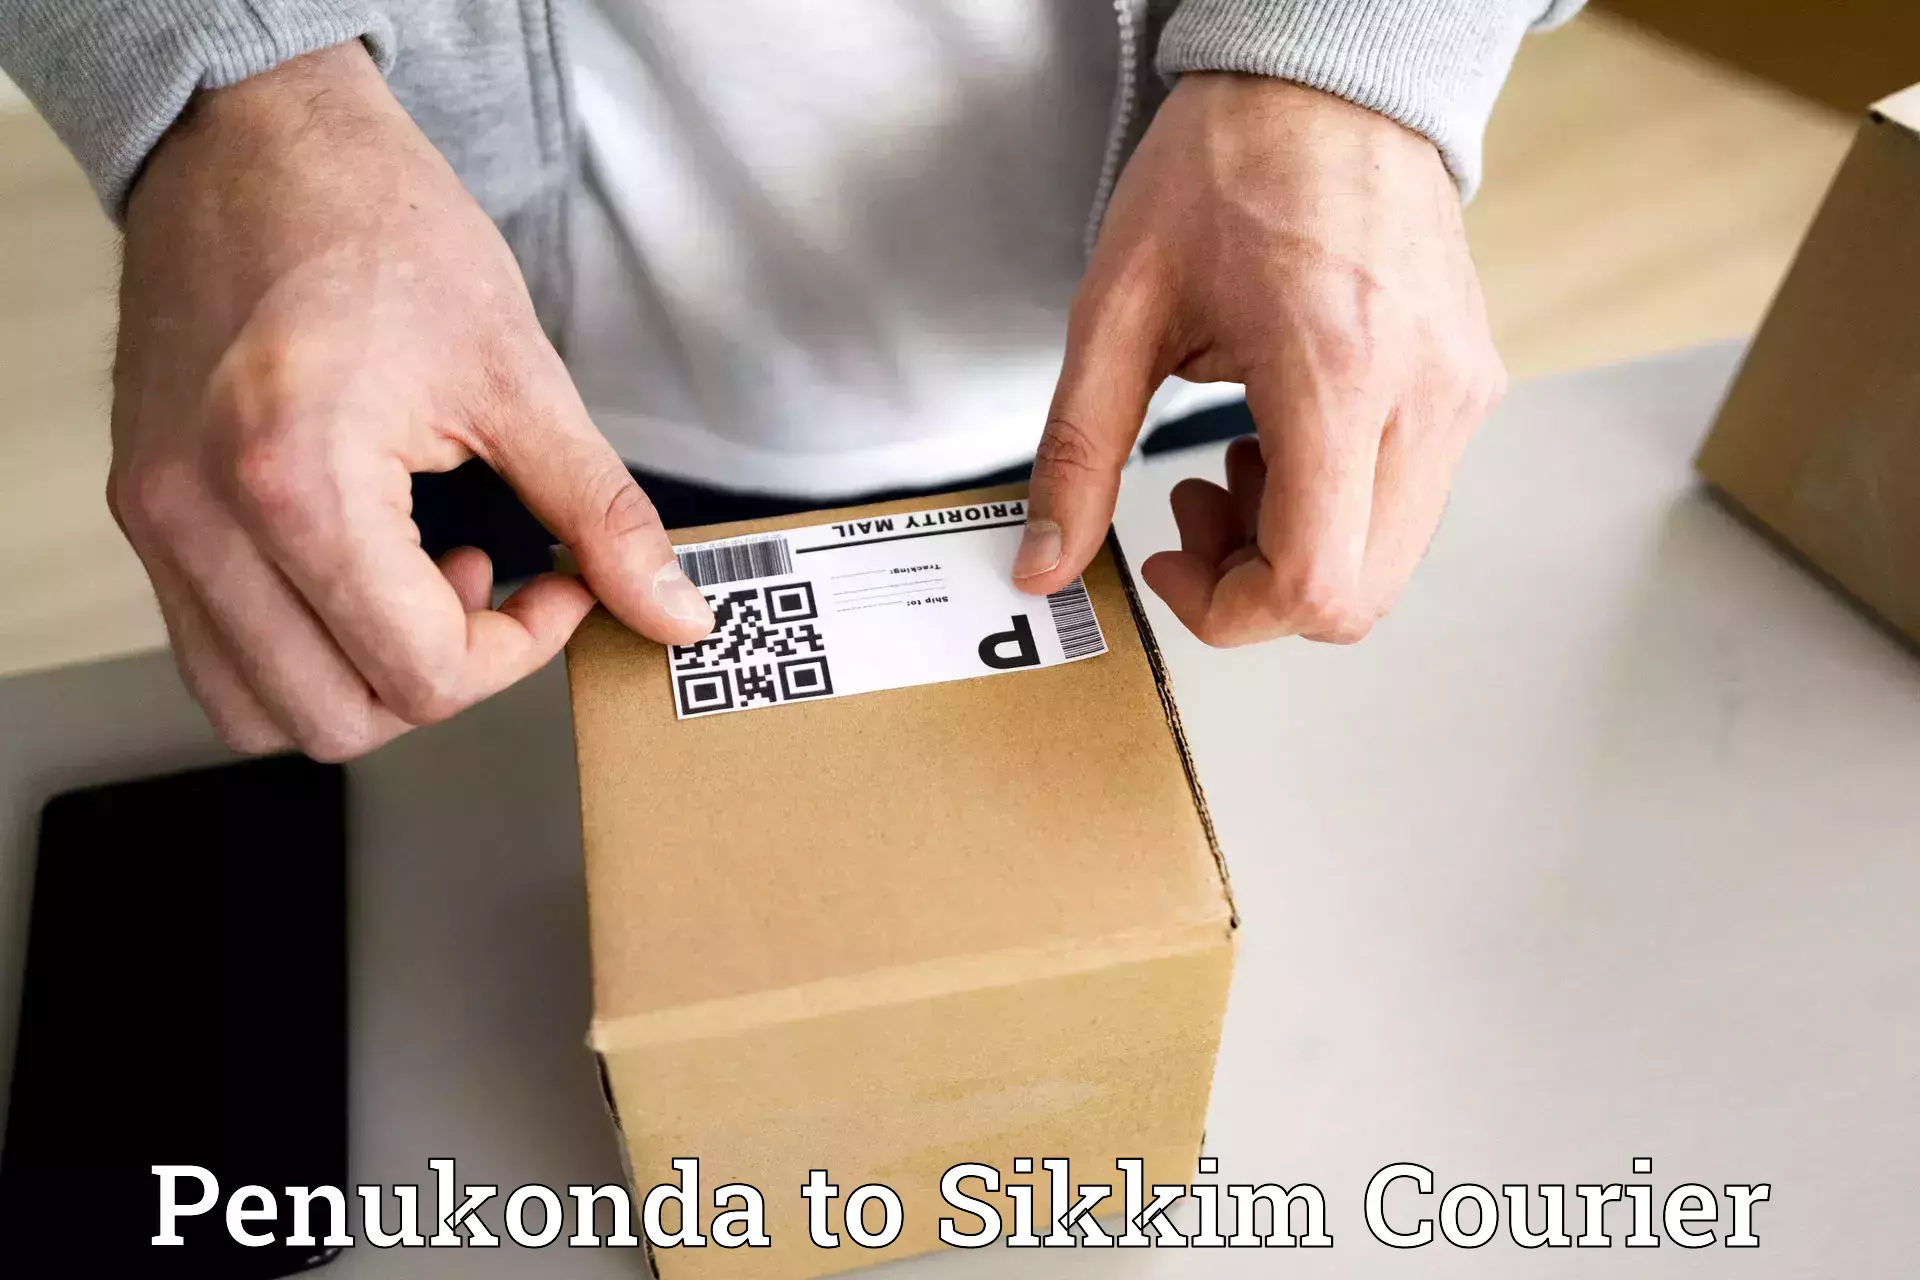 Professional delivery solutions in Penukonda to Pelling